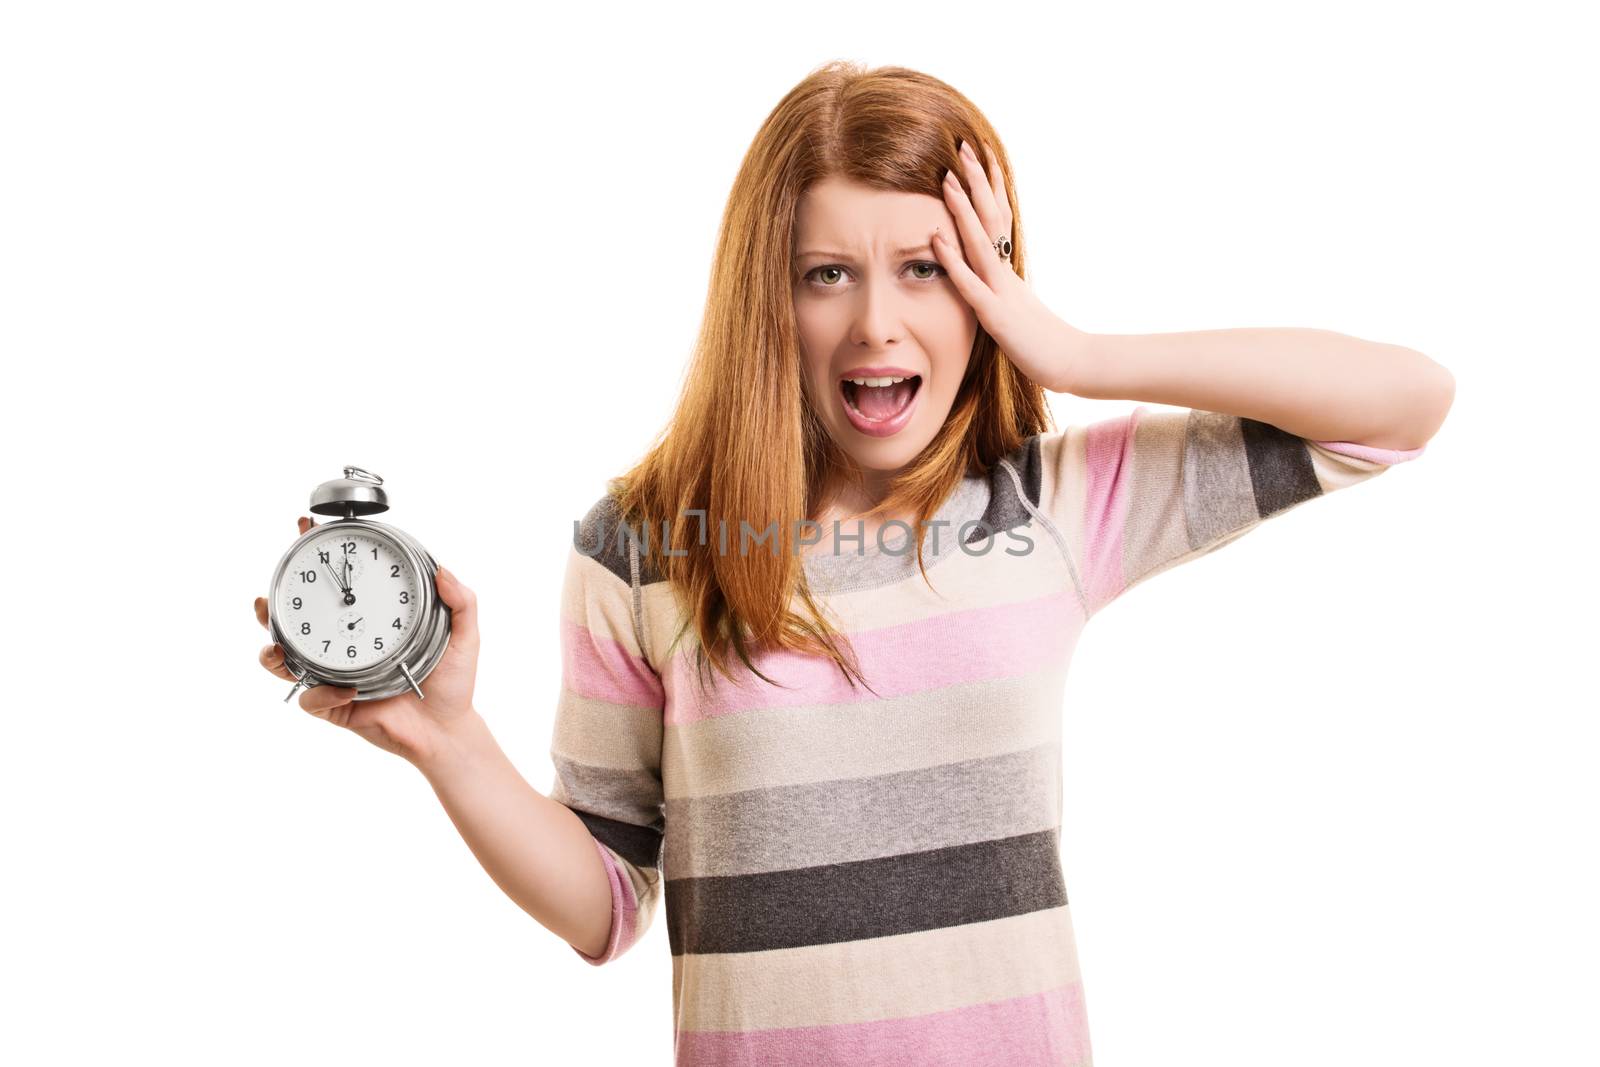 Being late concept. A portrait of a young woman holding an alarm clock, panicking about being late, isolated on white background.